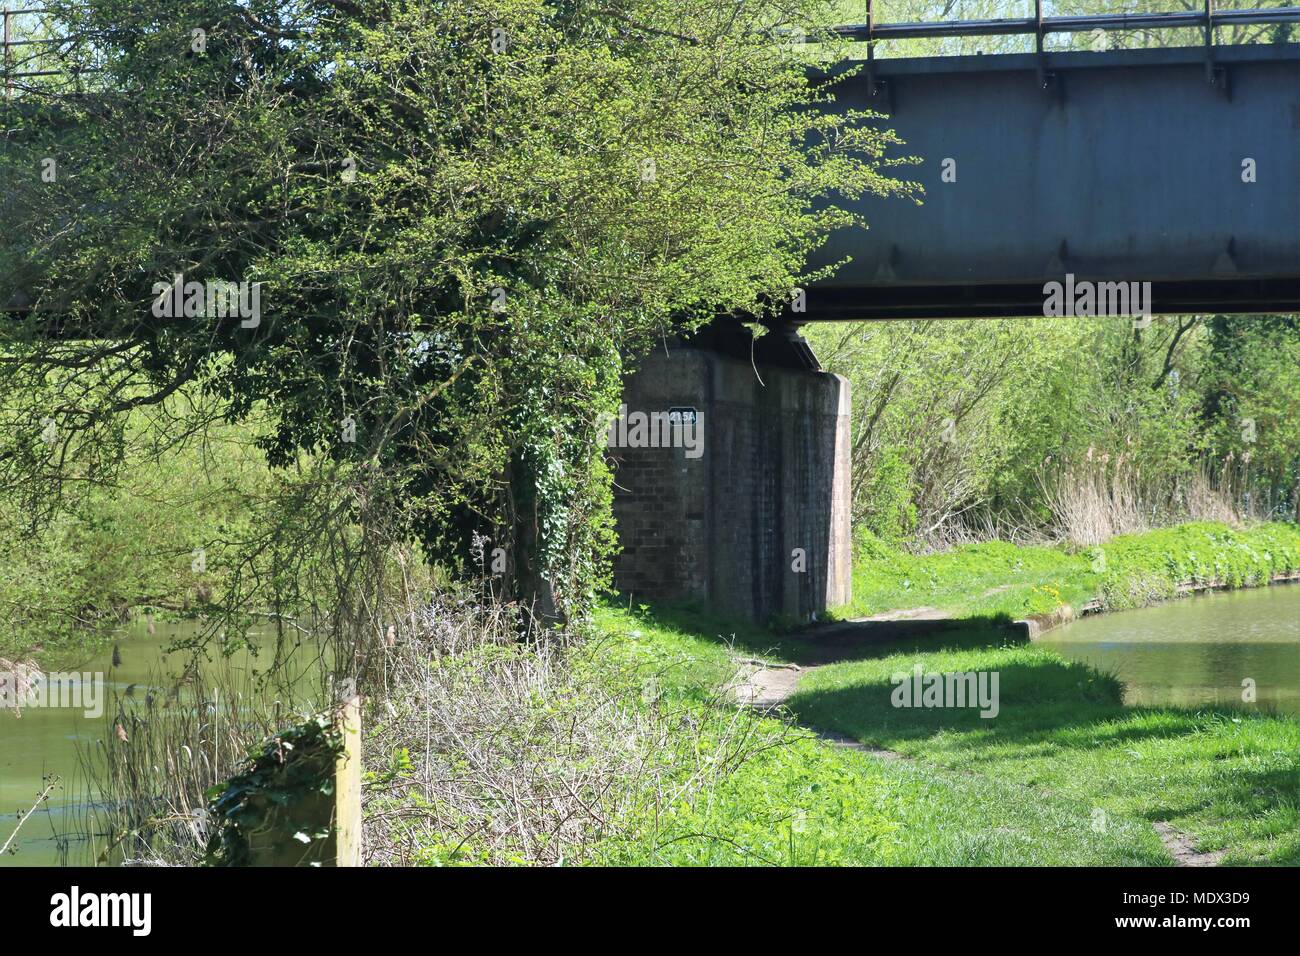 River Cherwell and Enslow Wharf canal side by side, both running under a bridge on a sunny day in Oxfordshire, UK Stock Photo